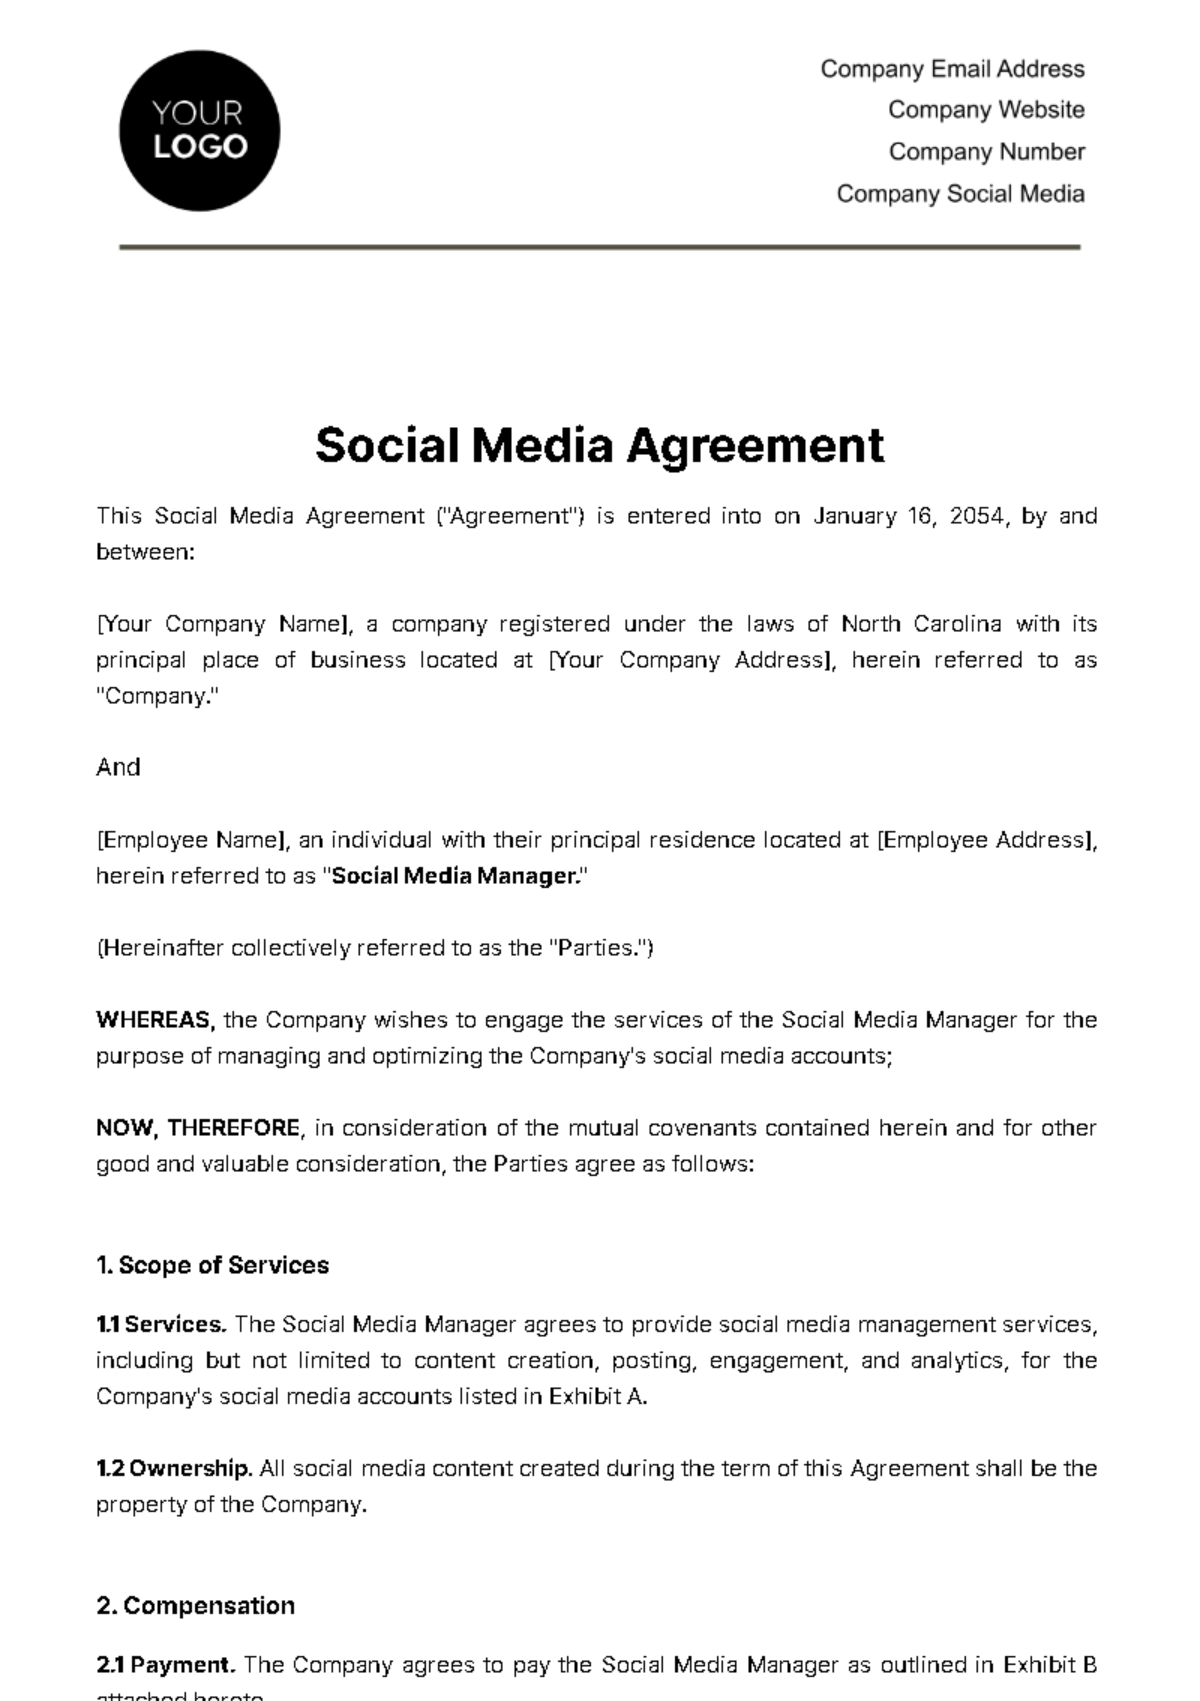 Free Social Media Agreement Template